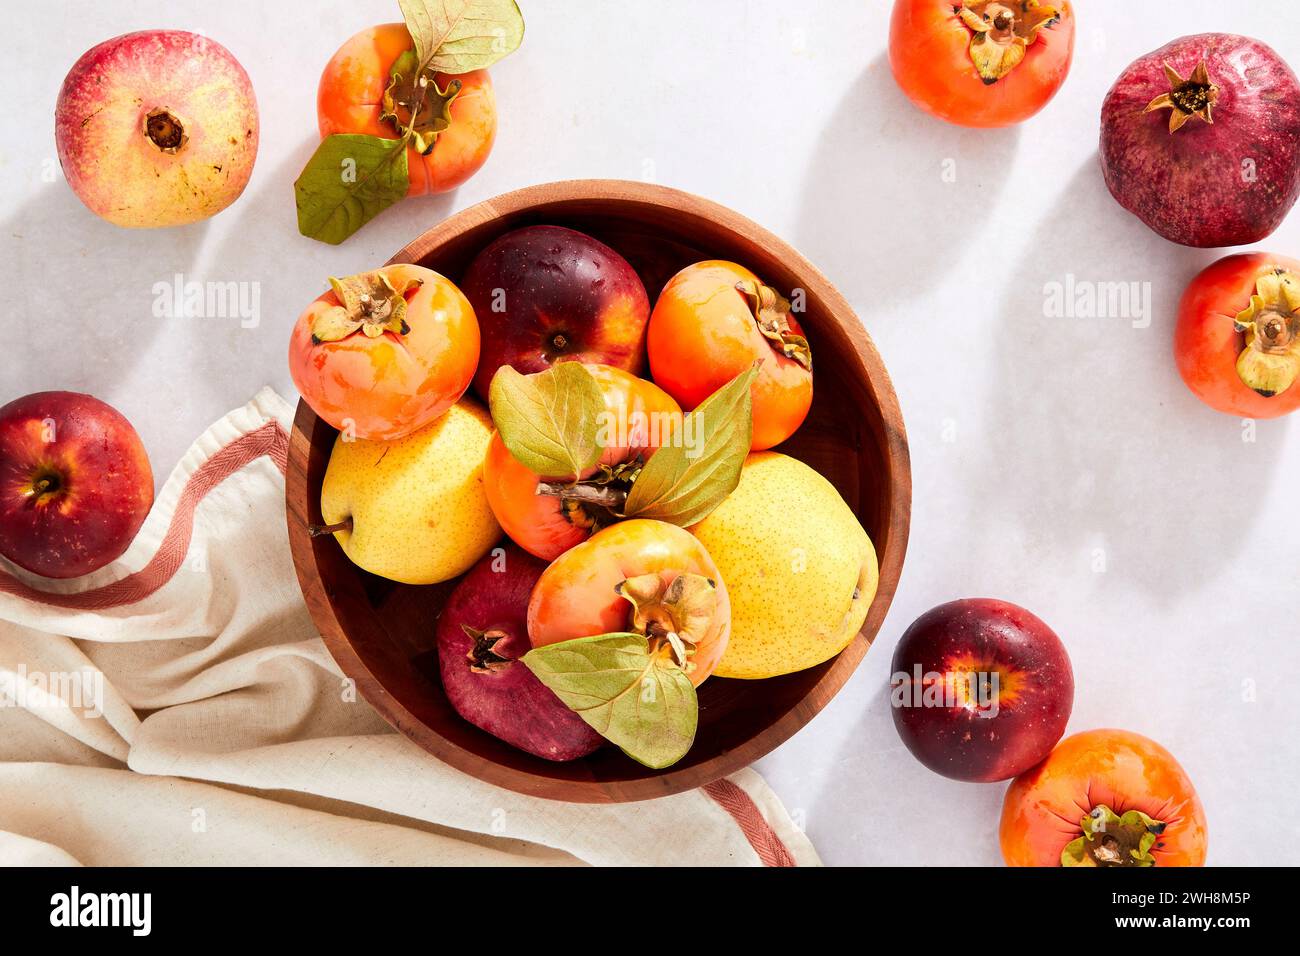 Pomegranates, persimmons, pears and apples in a bowl on a neutral background Stock Photo